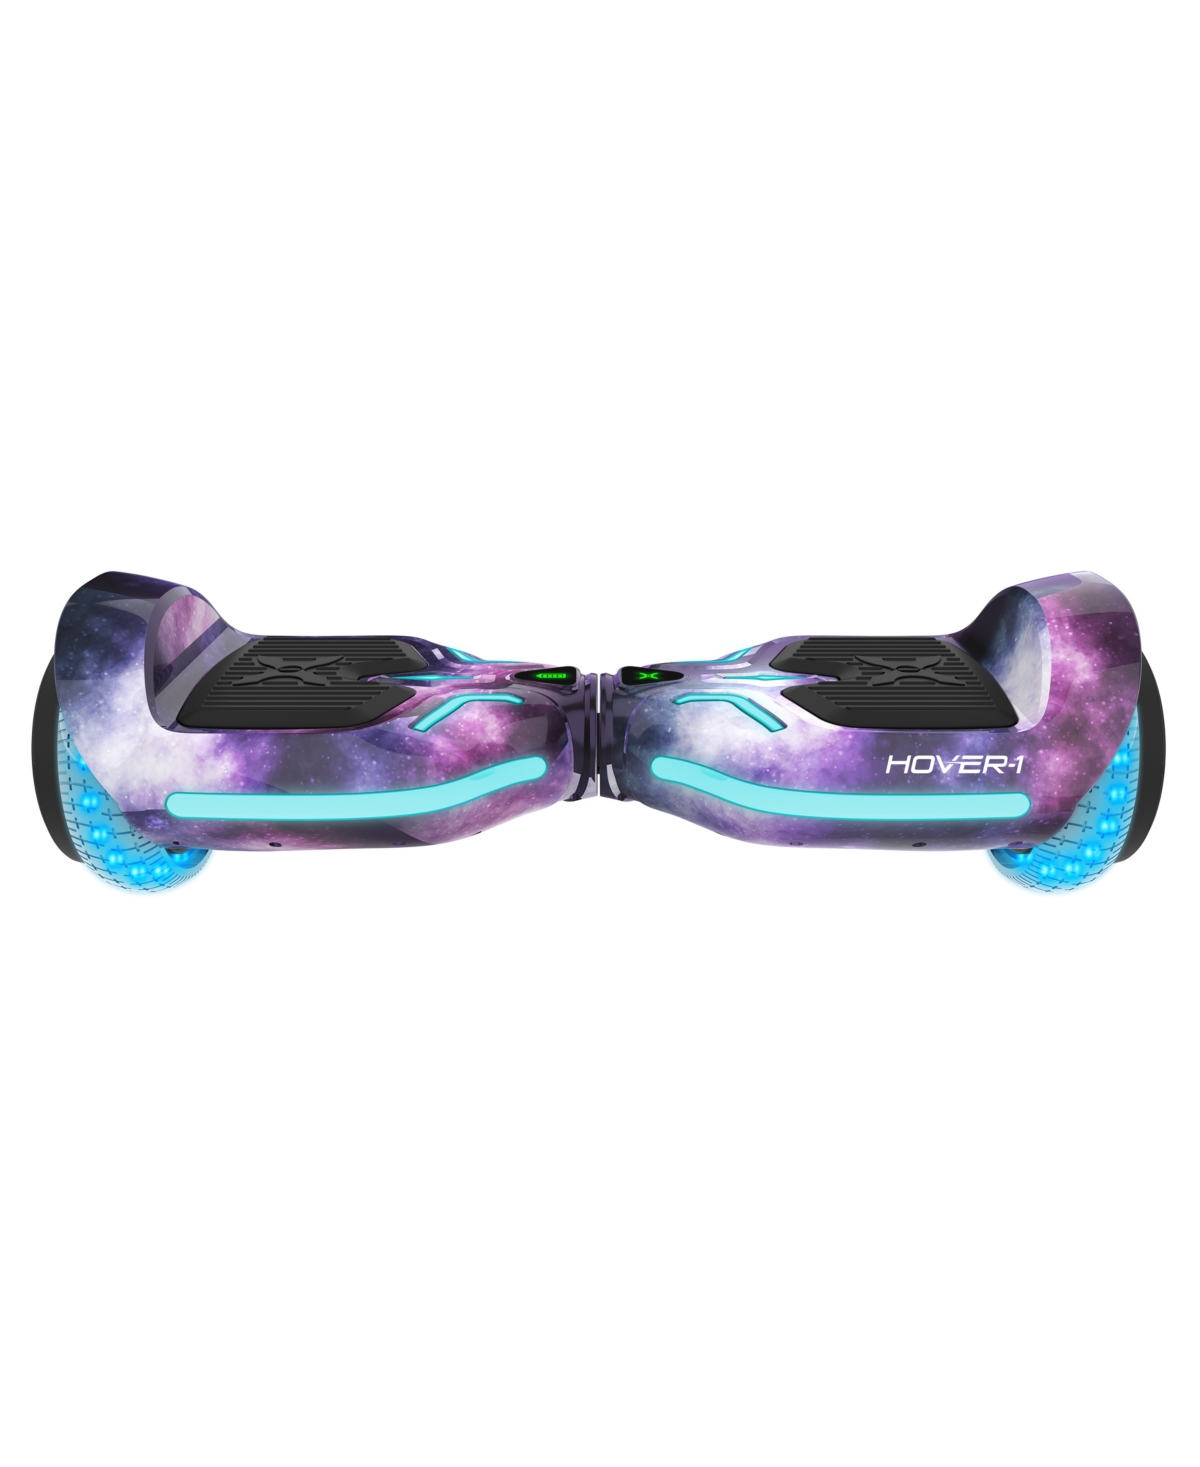 Hover-1 i-100 Hoverboard With Bluetooth® connectivity and built in speaker